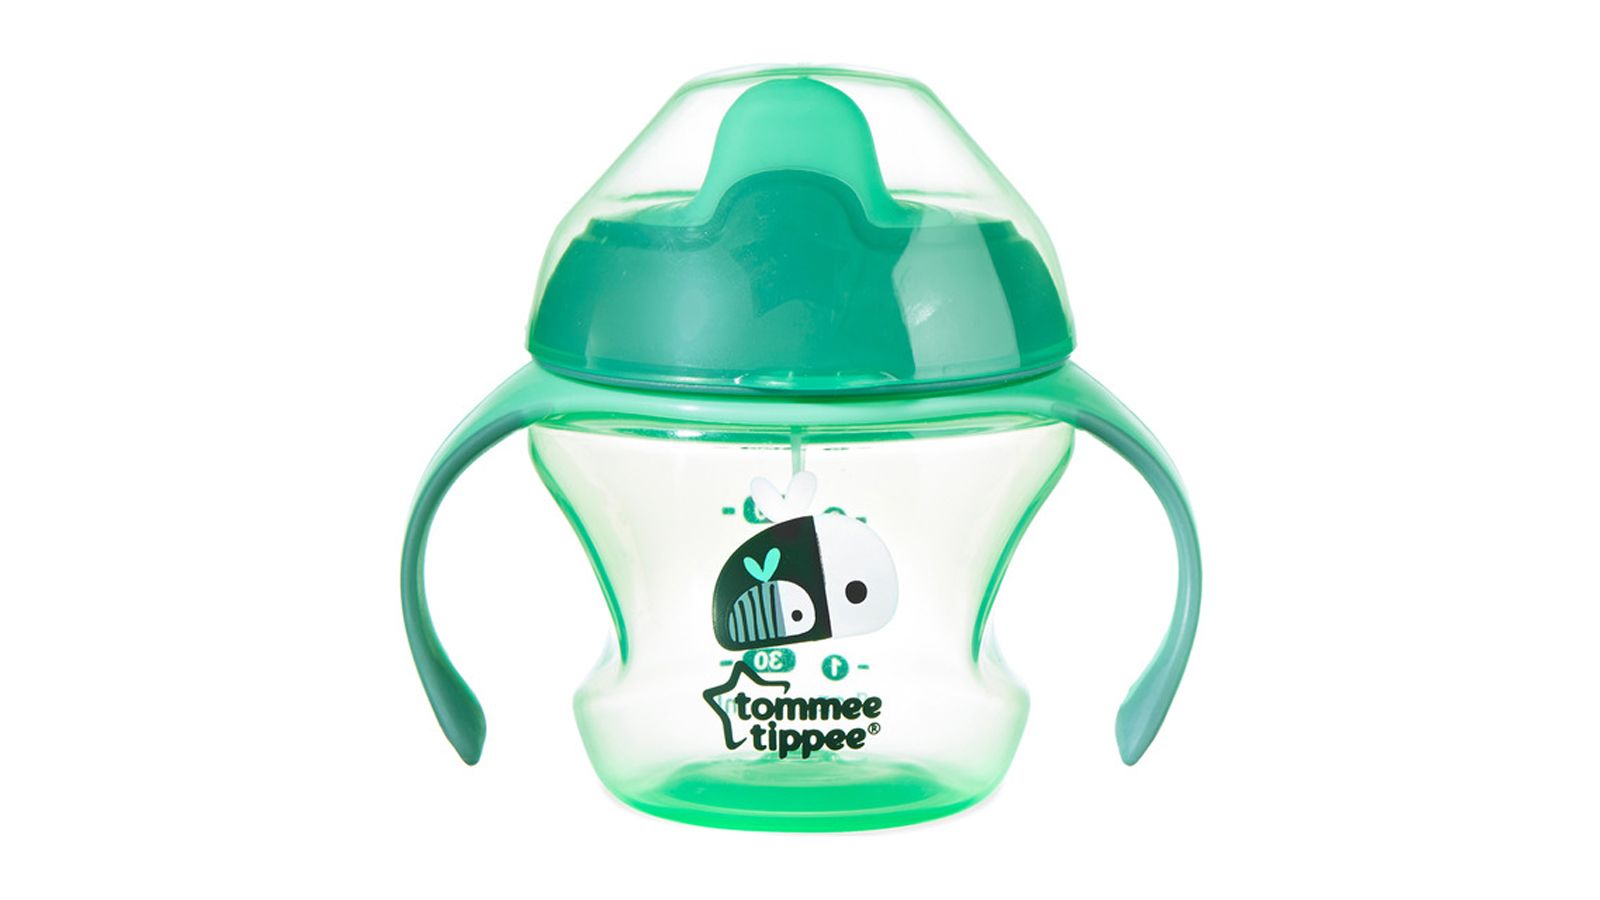 Tommee Tippee Sippee Cups Recalled by Mayborn USA